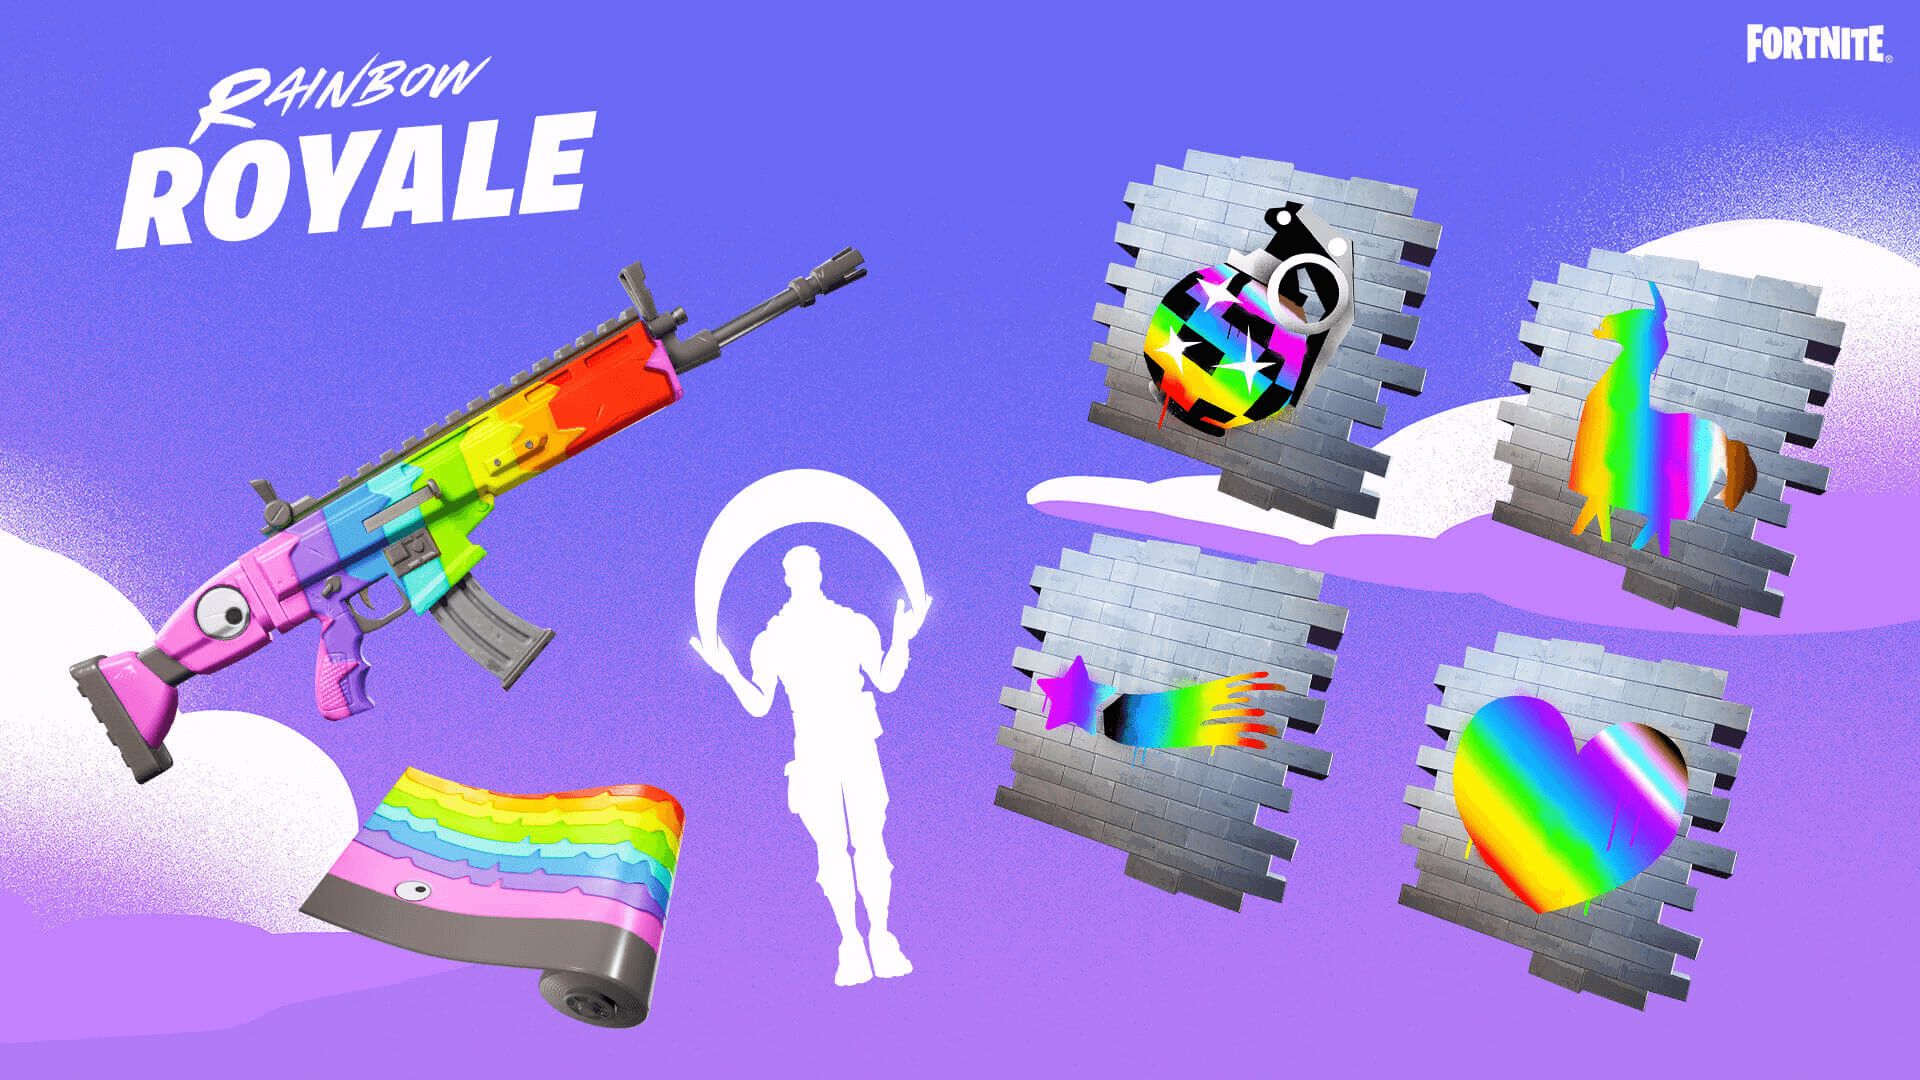 Epic Games took a big step and added DC's Draemer as the first Fortnite transgender character into the game with this year's Rainbow Royale event.